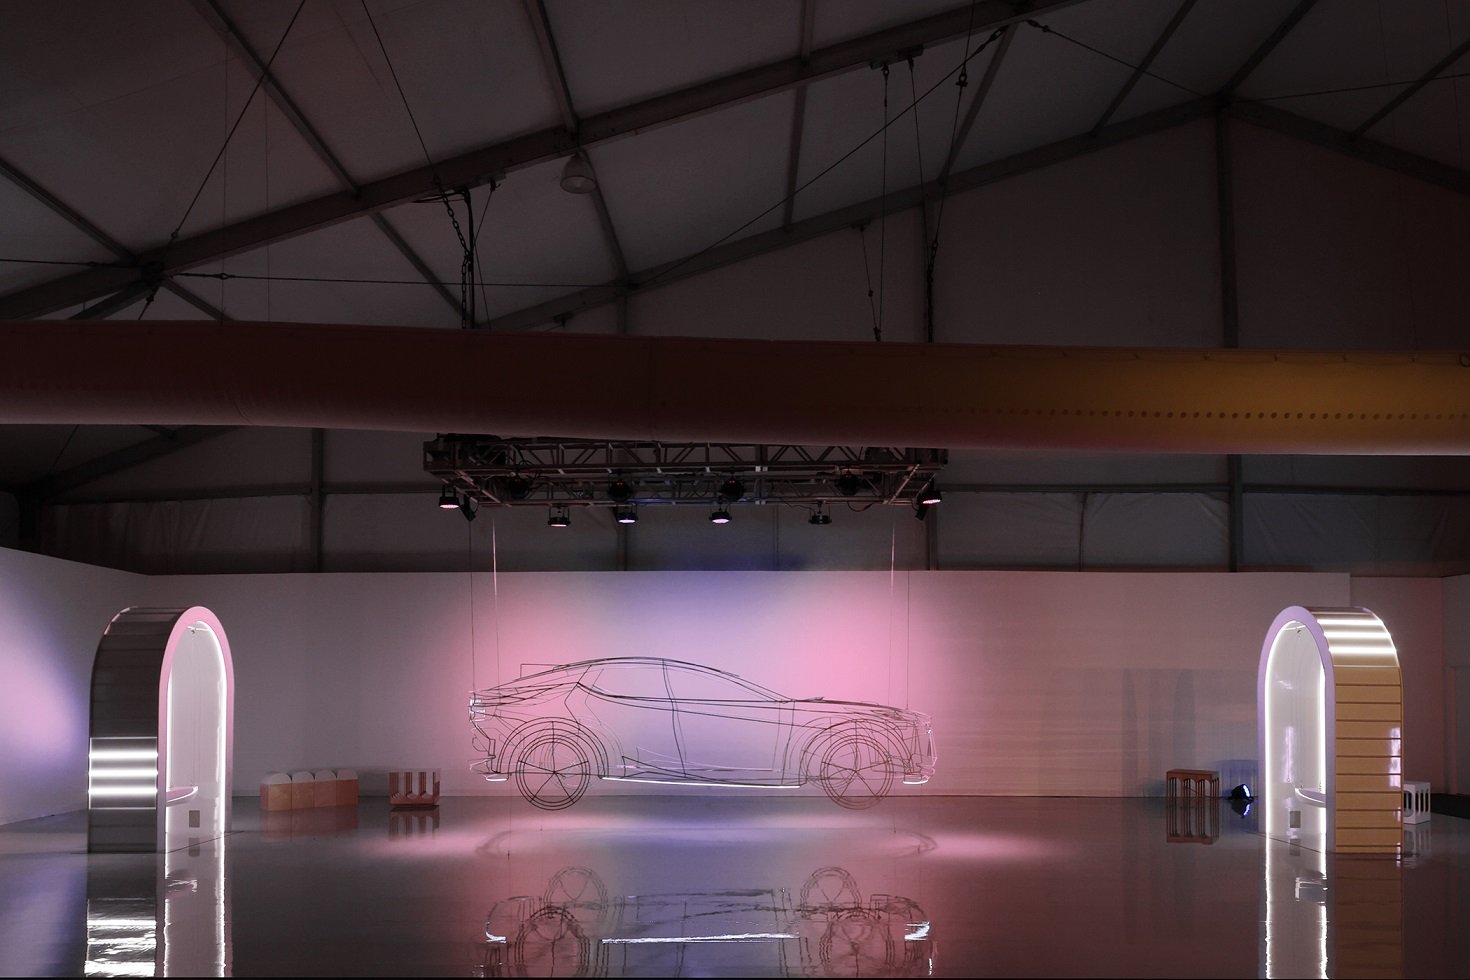 Lexus unveils at Design Miami 2021A a vision for an electrified carbon neutral and human centered future by Germane Barnes